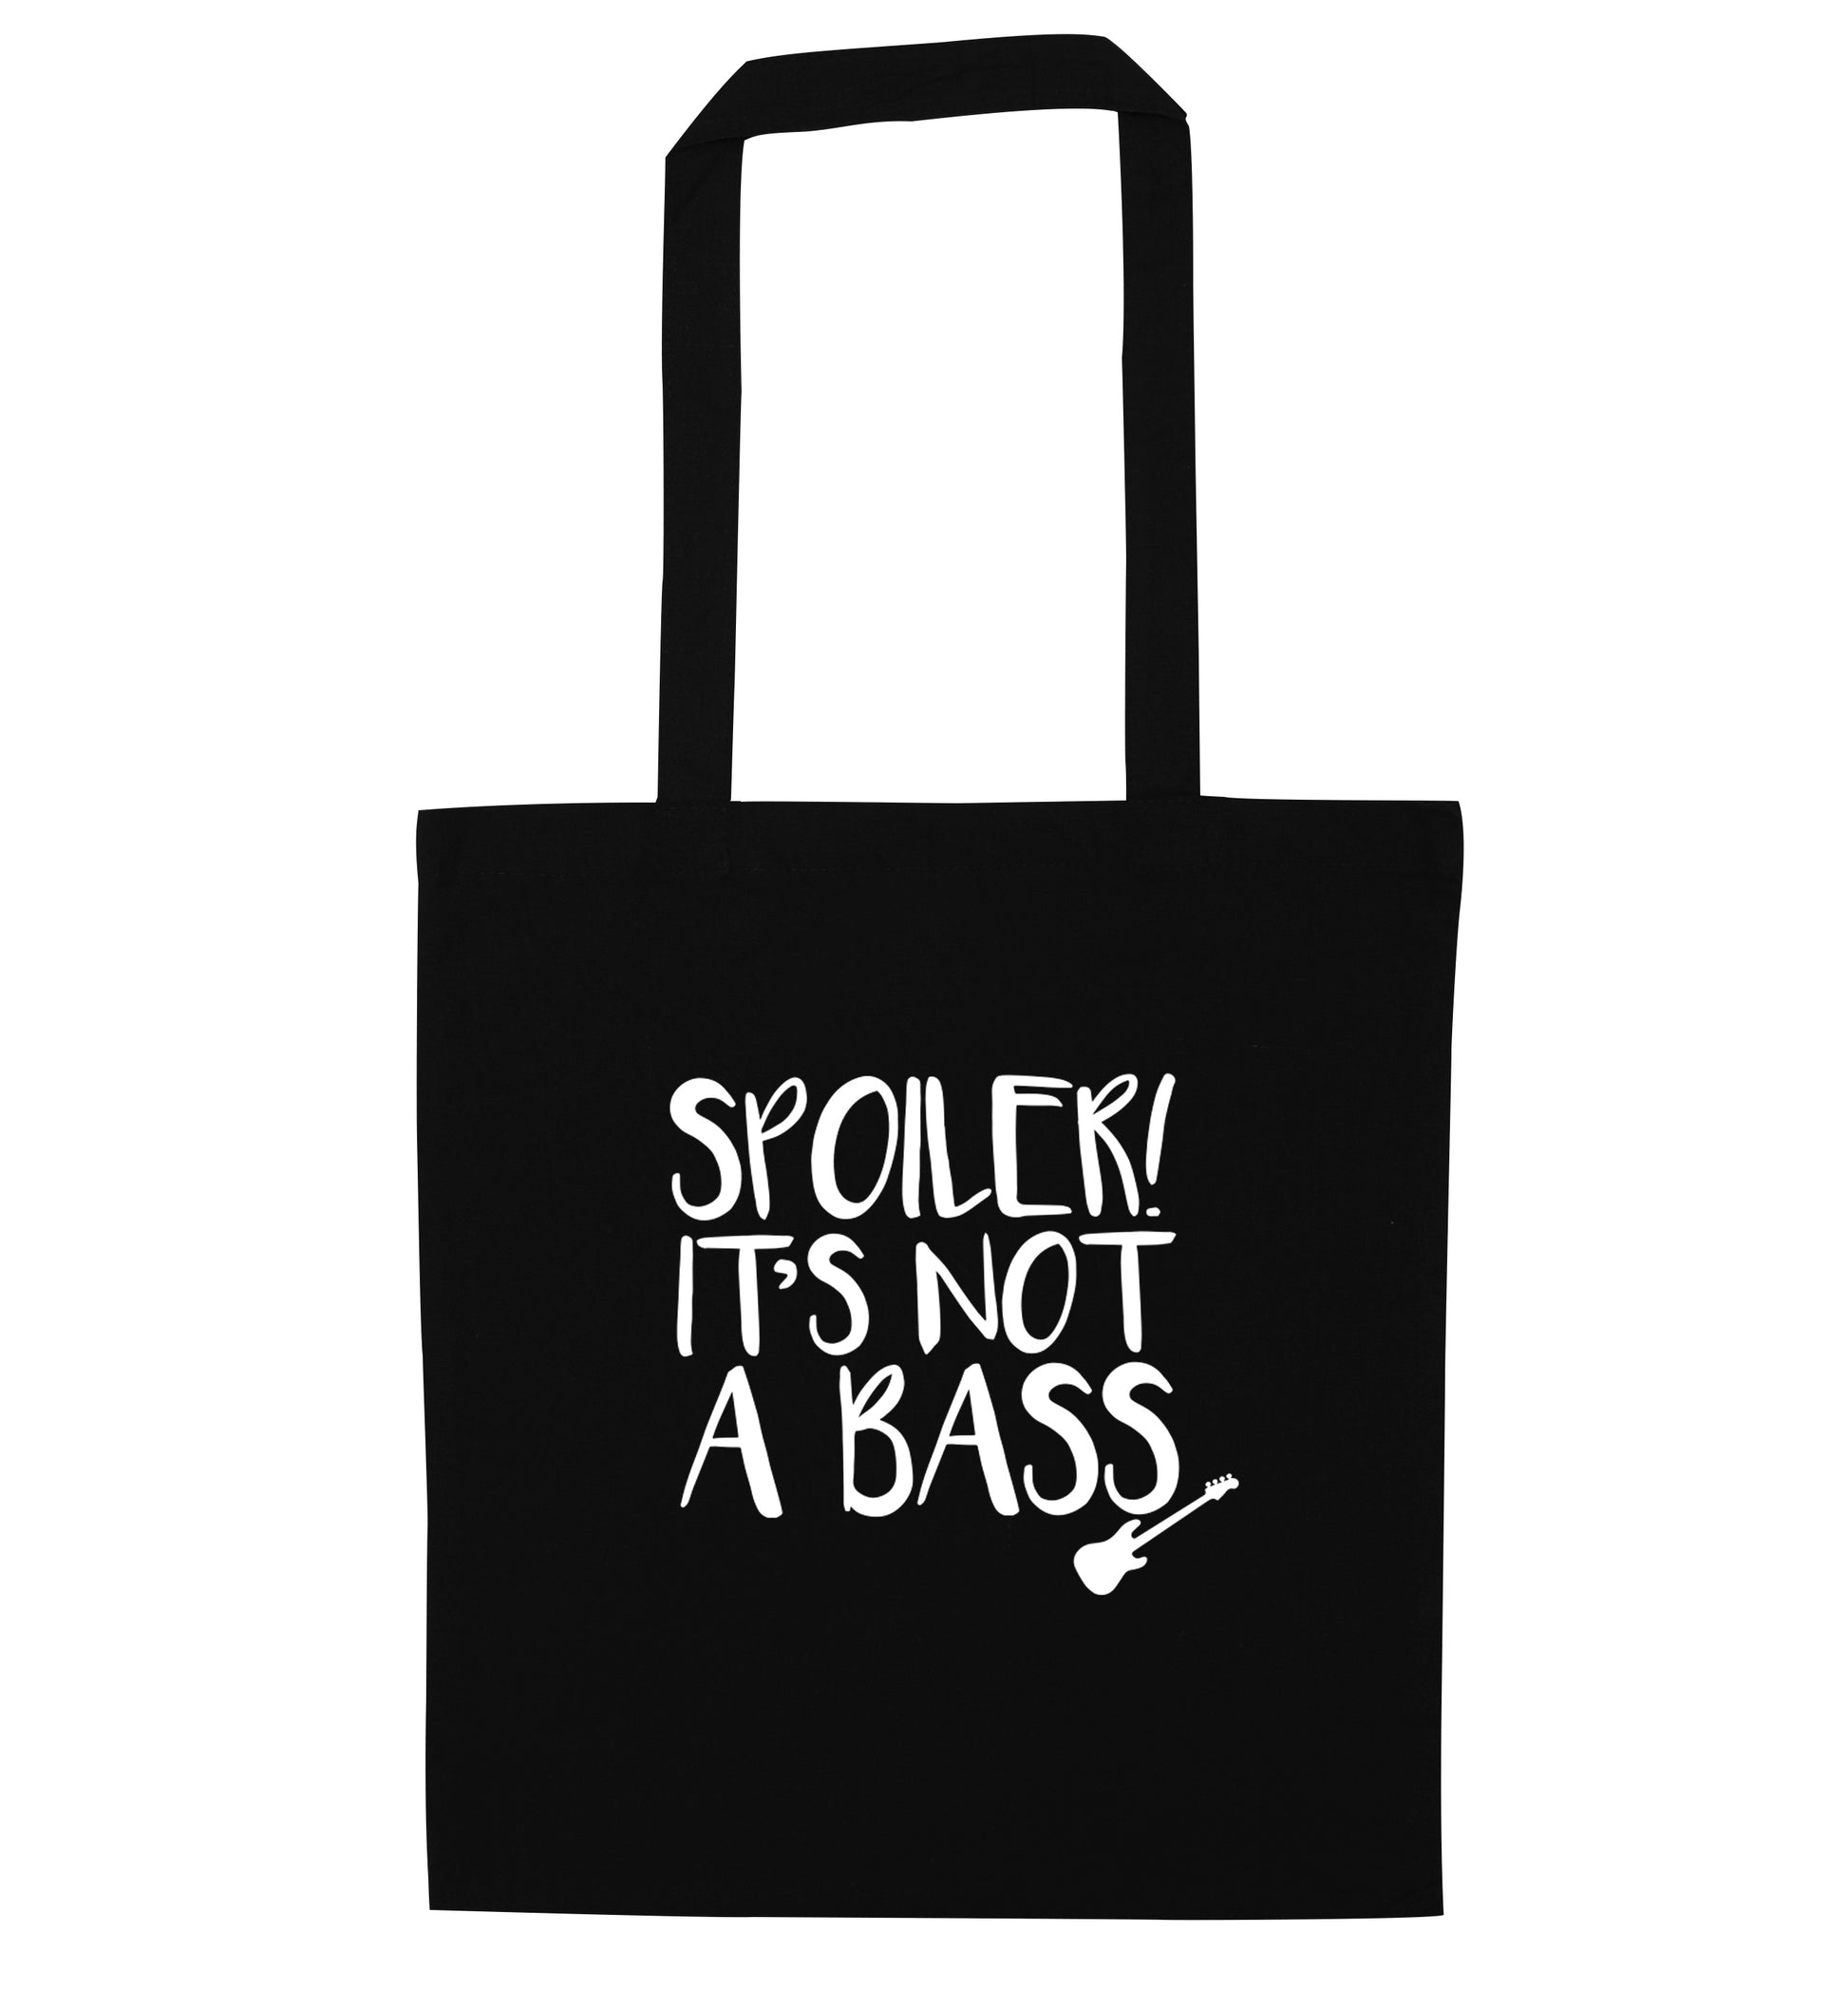 Spoiler it's not a bass black tote bag